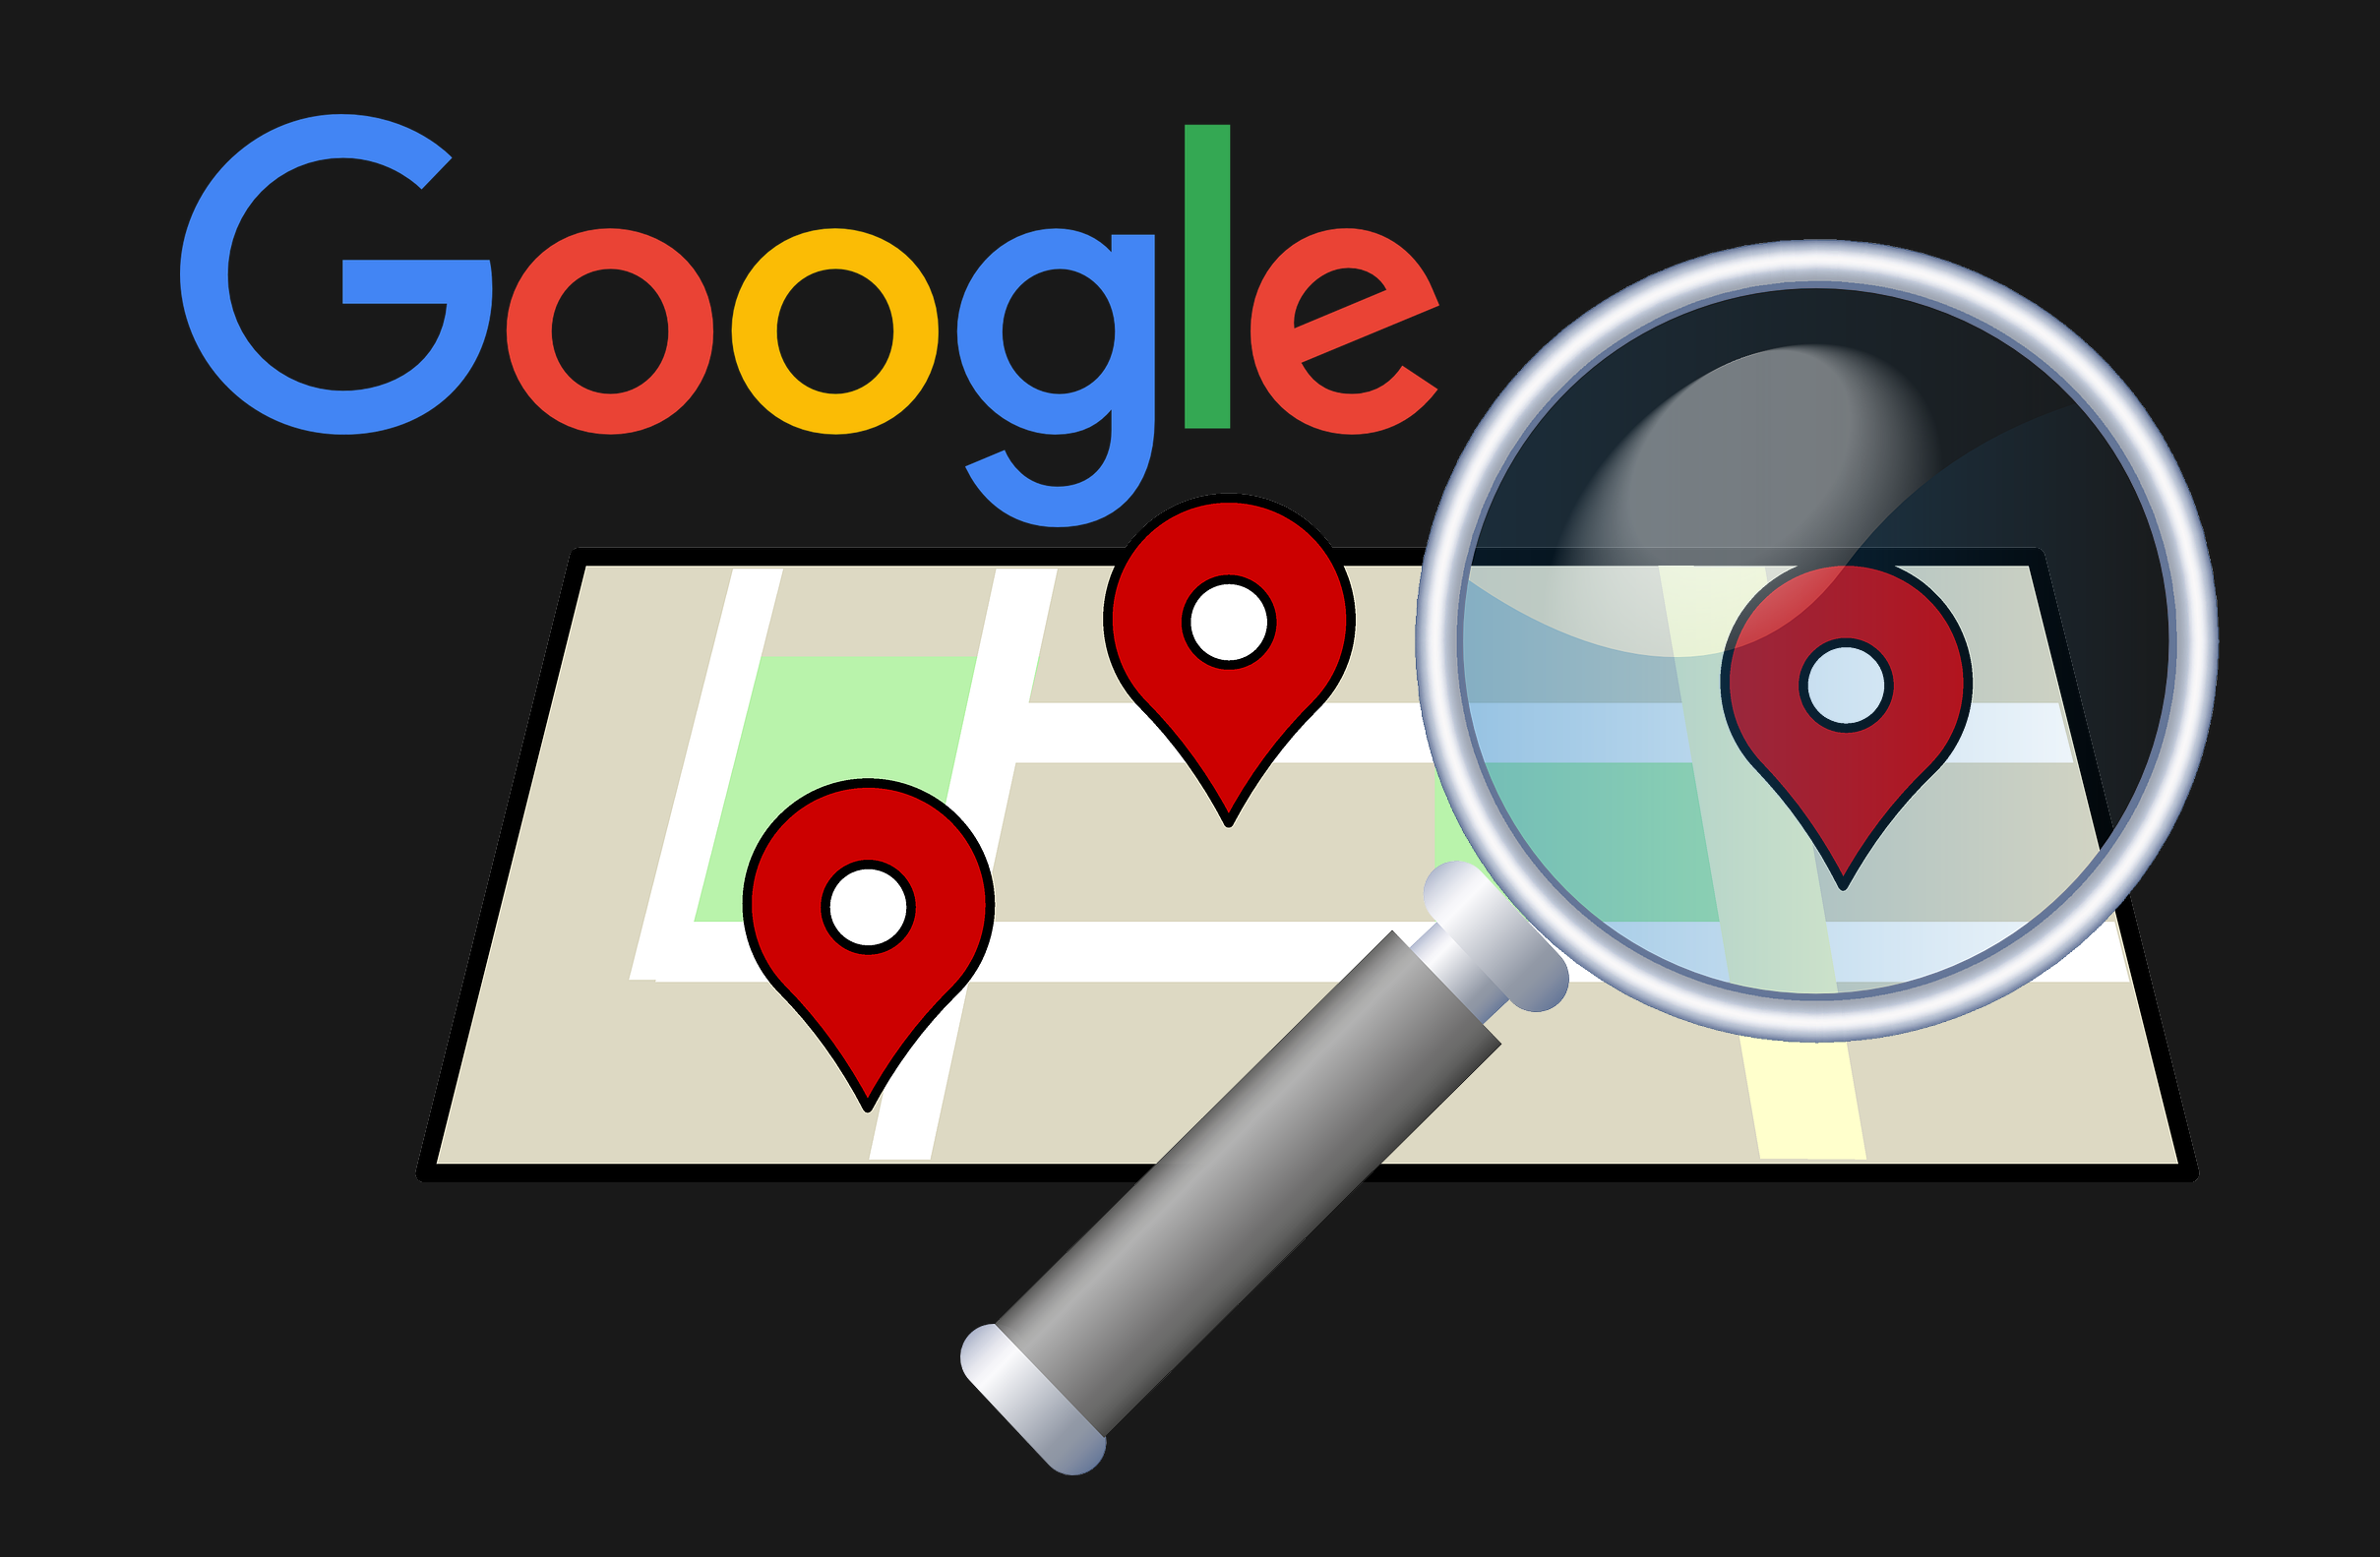 Google’s Vicinity Update: What Should YOUR Business Do About It in 2022?